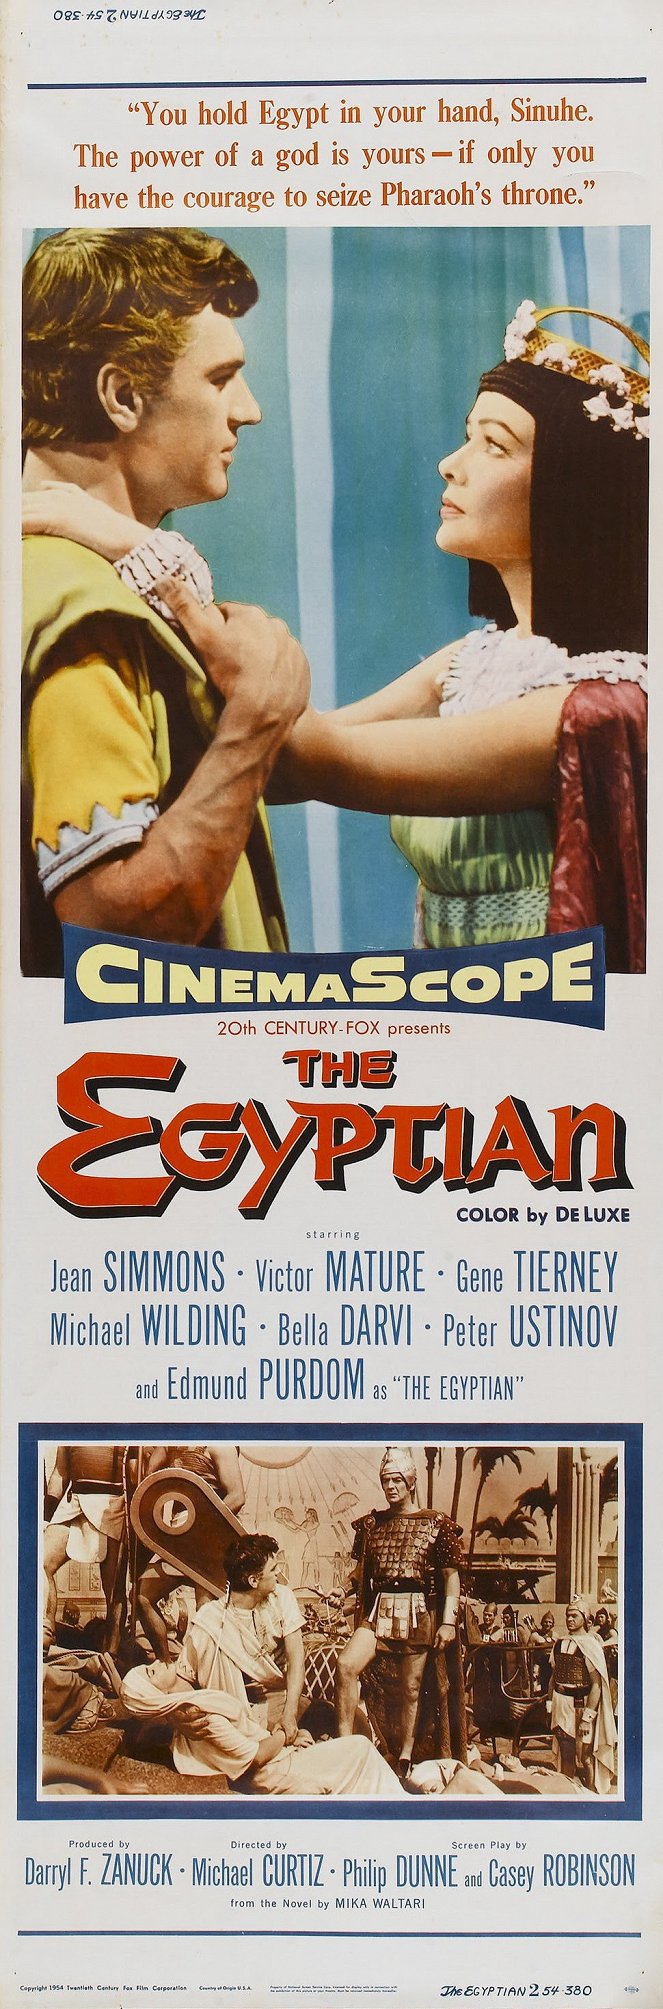 The Egyptian - Posters